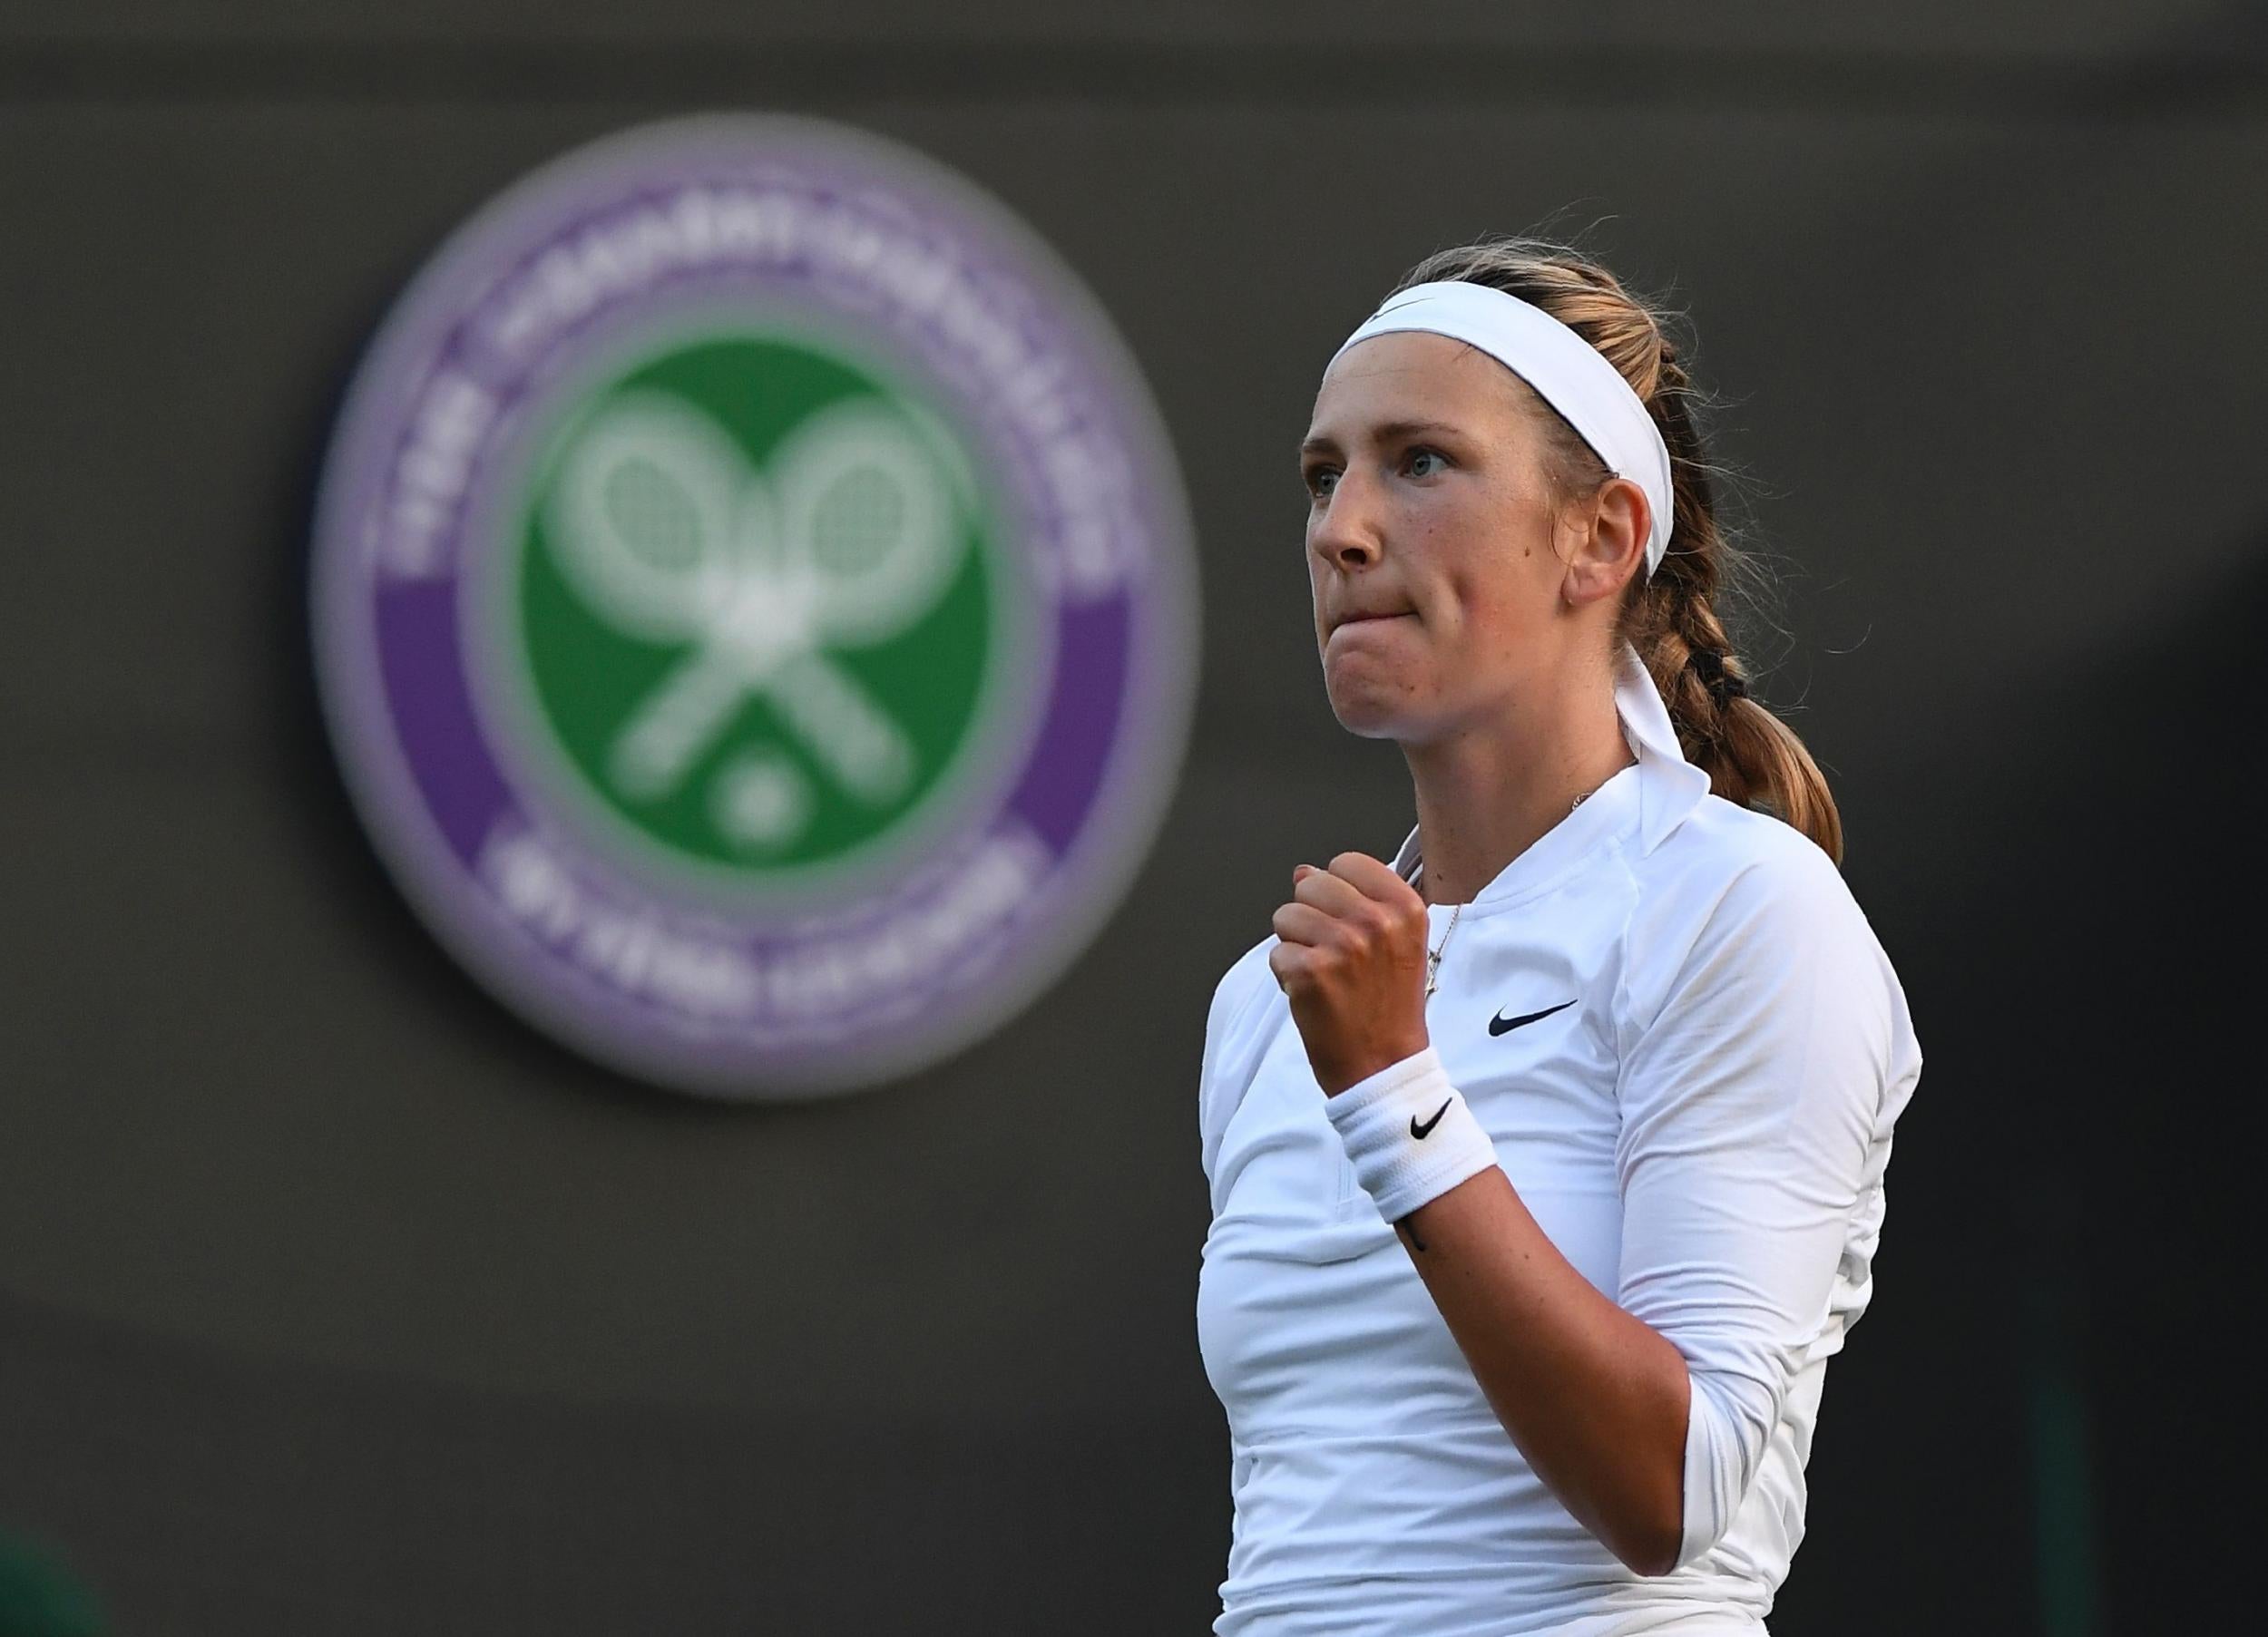 Azarenka has only just returned to tennis after giving birth in December